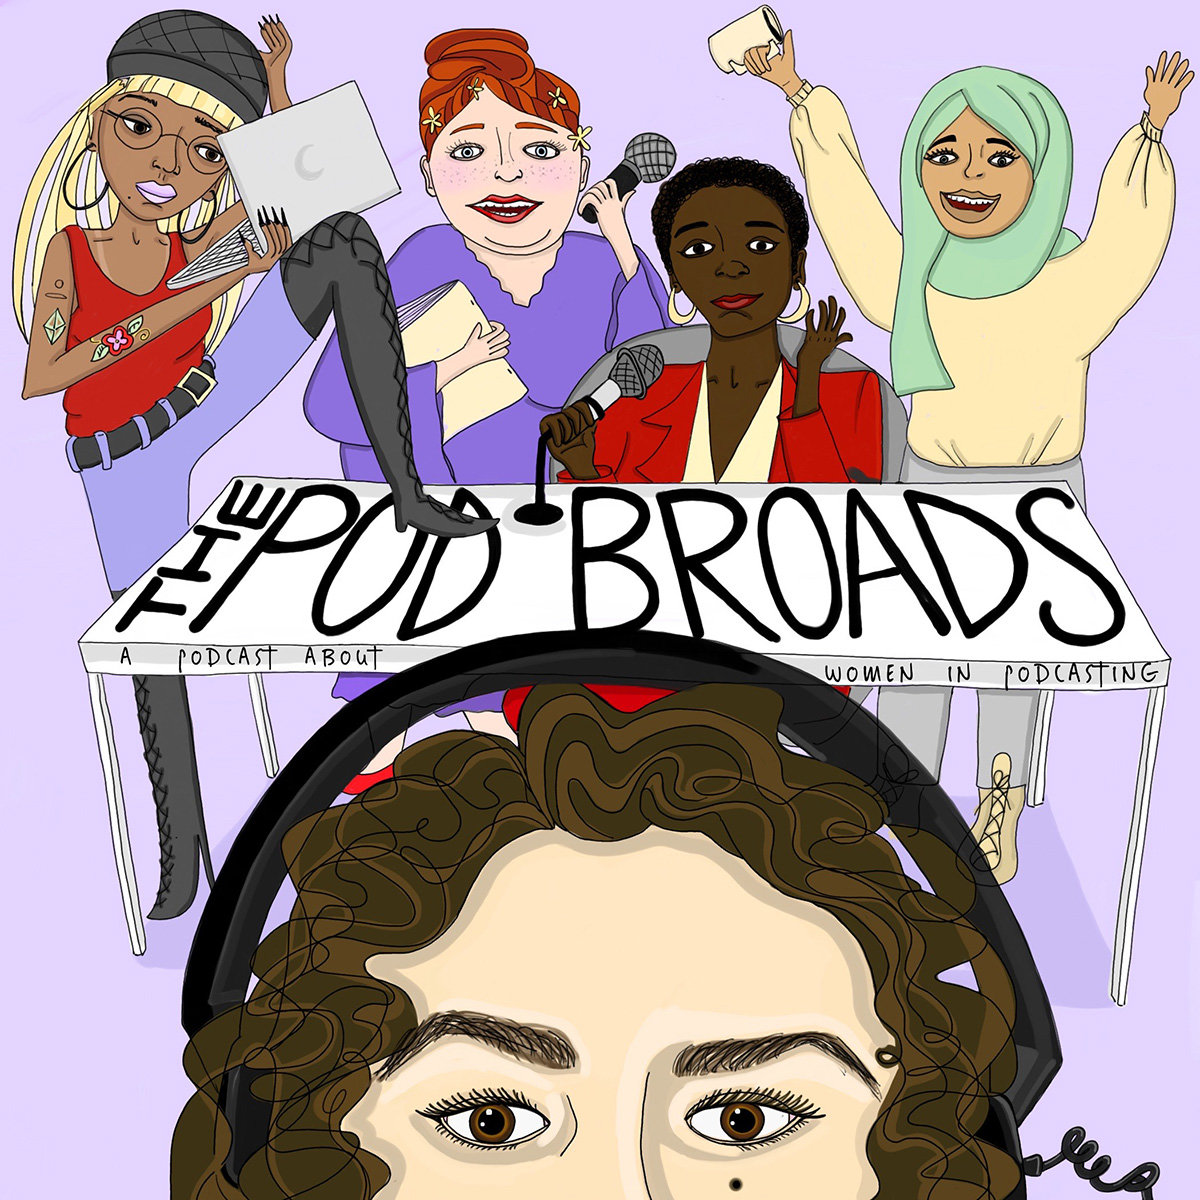 “The Pod Broads” is an interview-style show where women in podcasting talk about their life experiences and work. The artwork was designed by Elsa Bermudez.